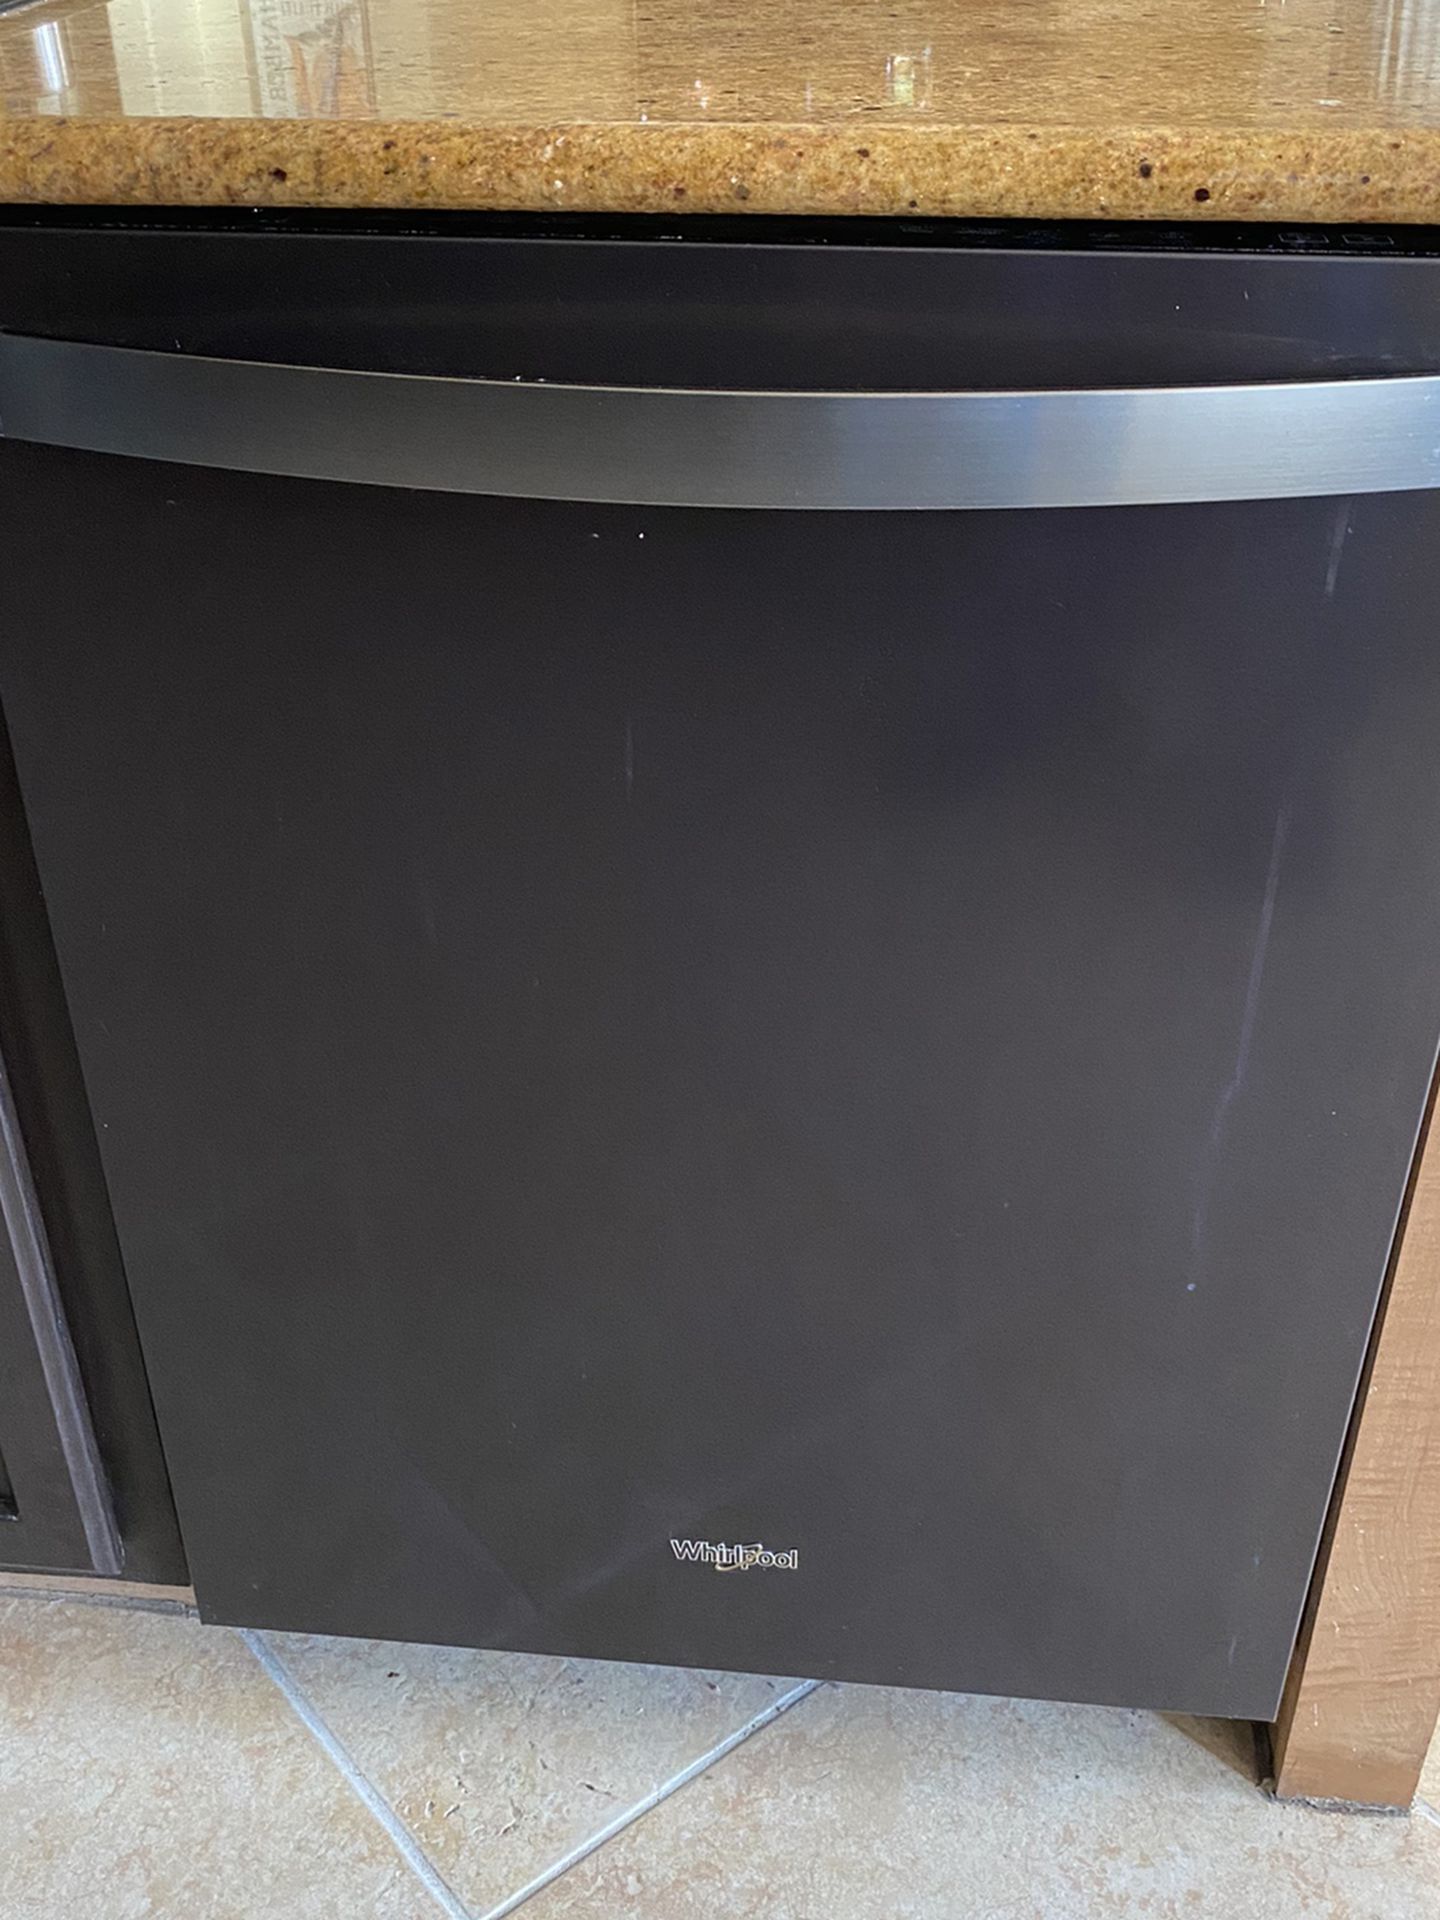 Excellent Black Stainless Whirlpool Dishwasher